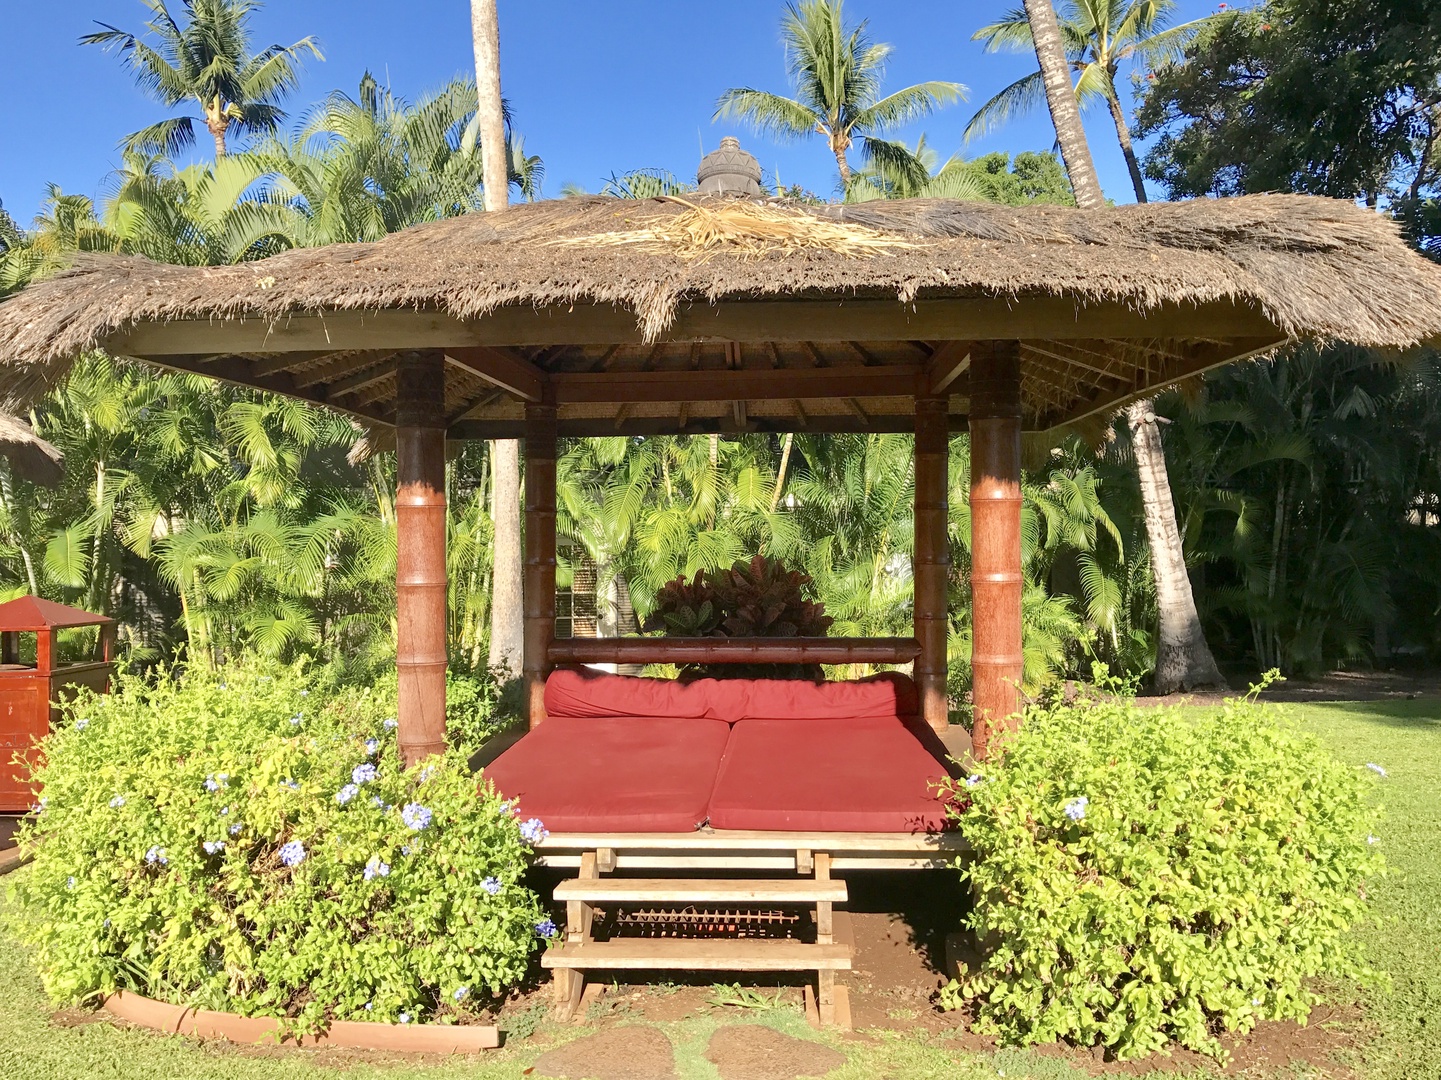 Lahaina Vacation Rentals, Aina Nalu D-207: Affordable luxury at it's best! - Enjoy a good book or a quick nap in one of the poolside cabanas.